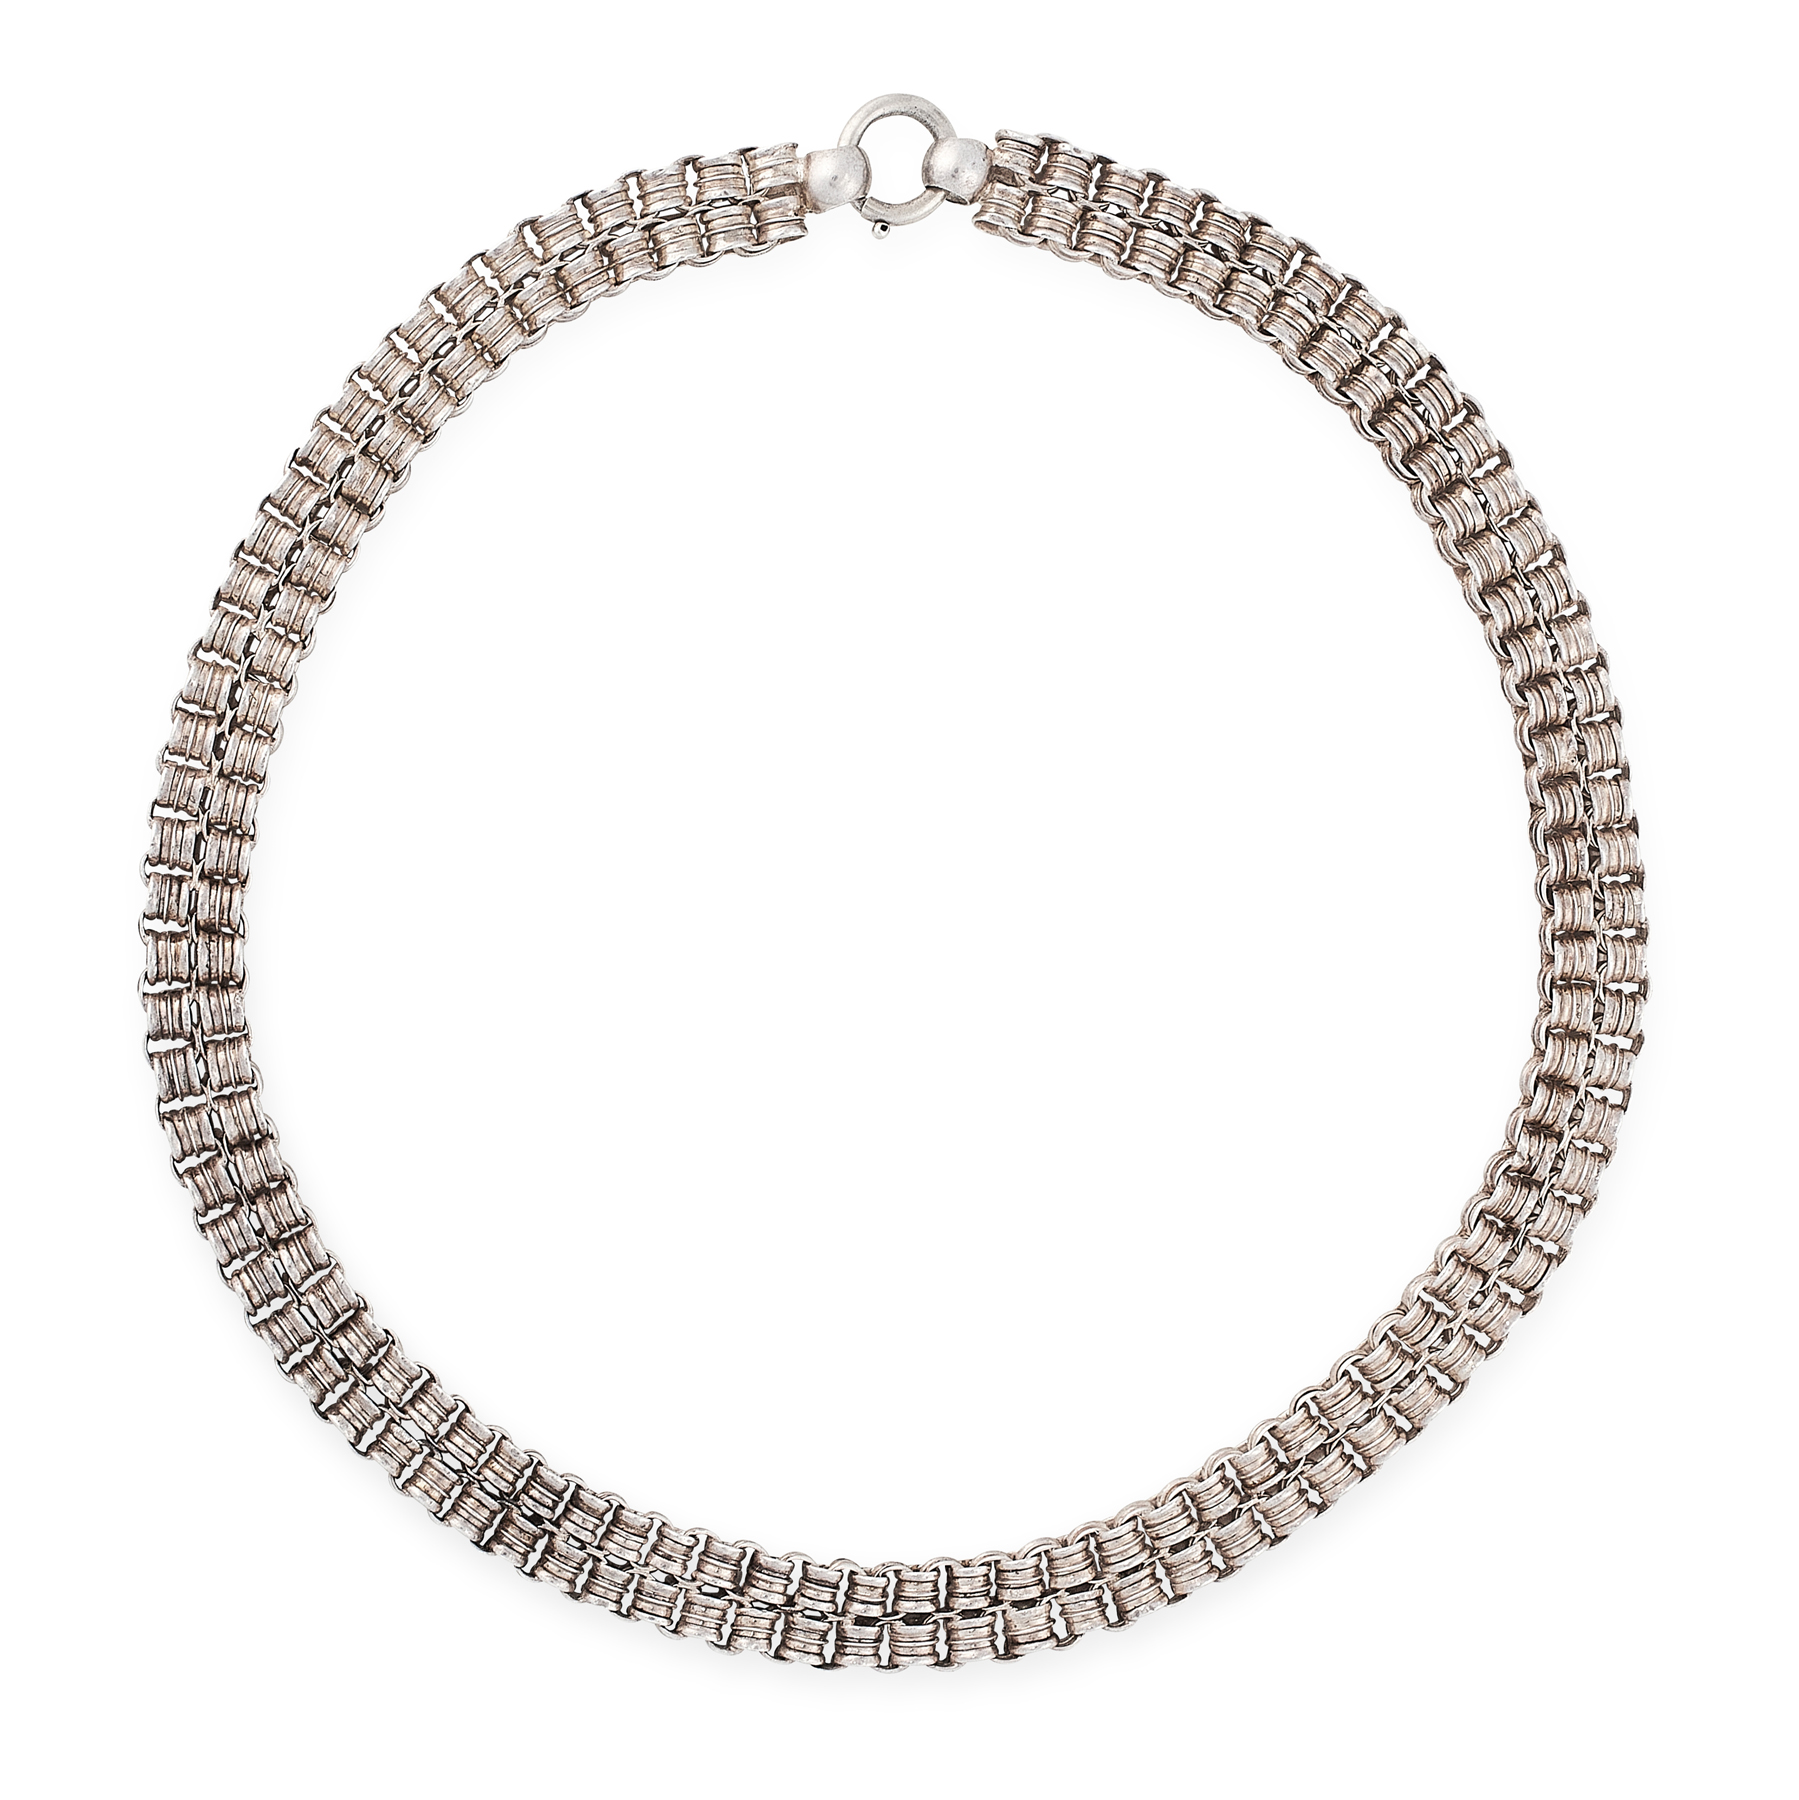 AN ANTIQUE VICTORIAN COLLAR NECKLACE, 19TH CENTURY in sterling silver, formed of interlocking